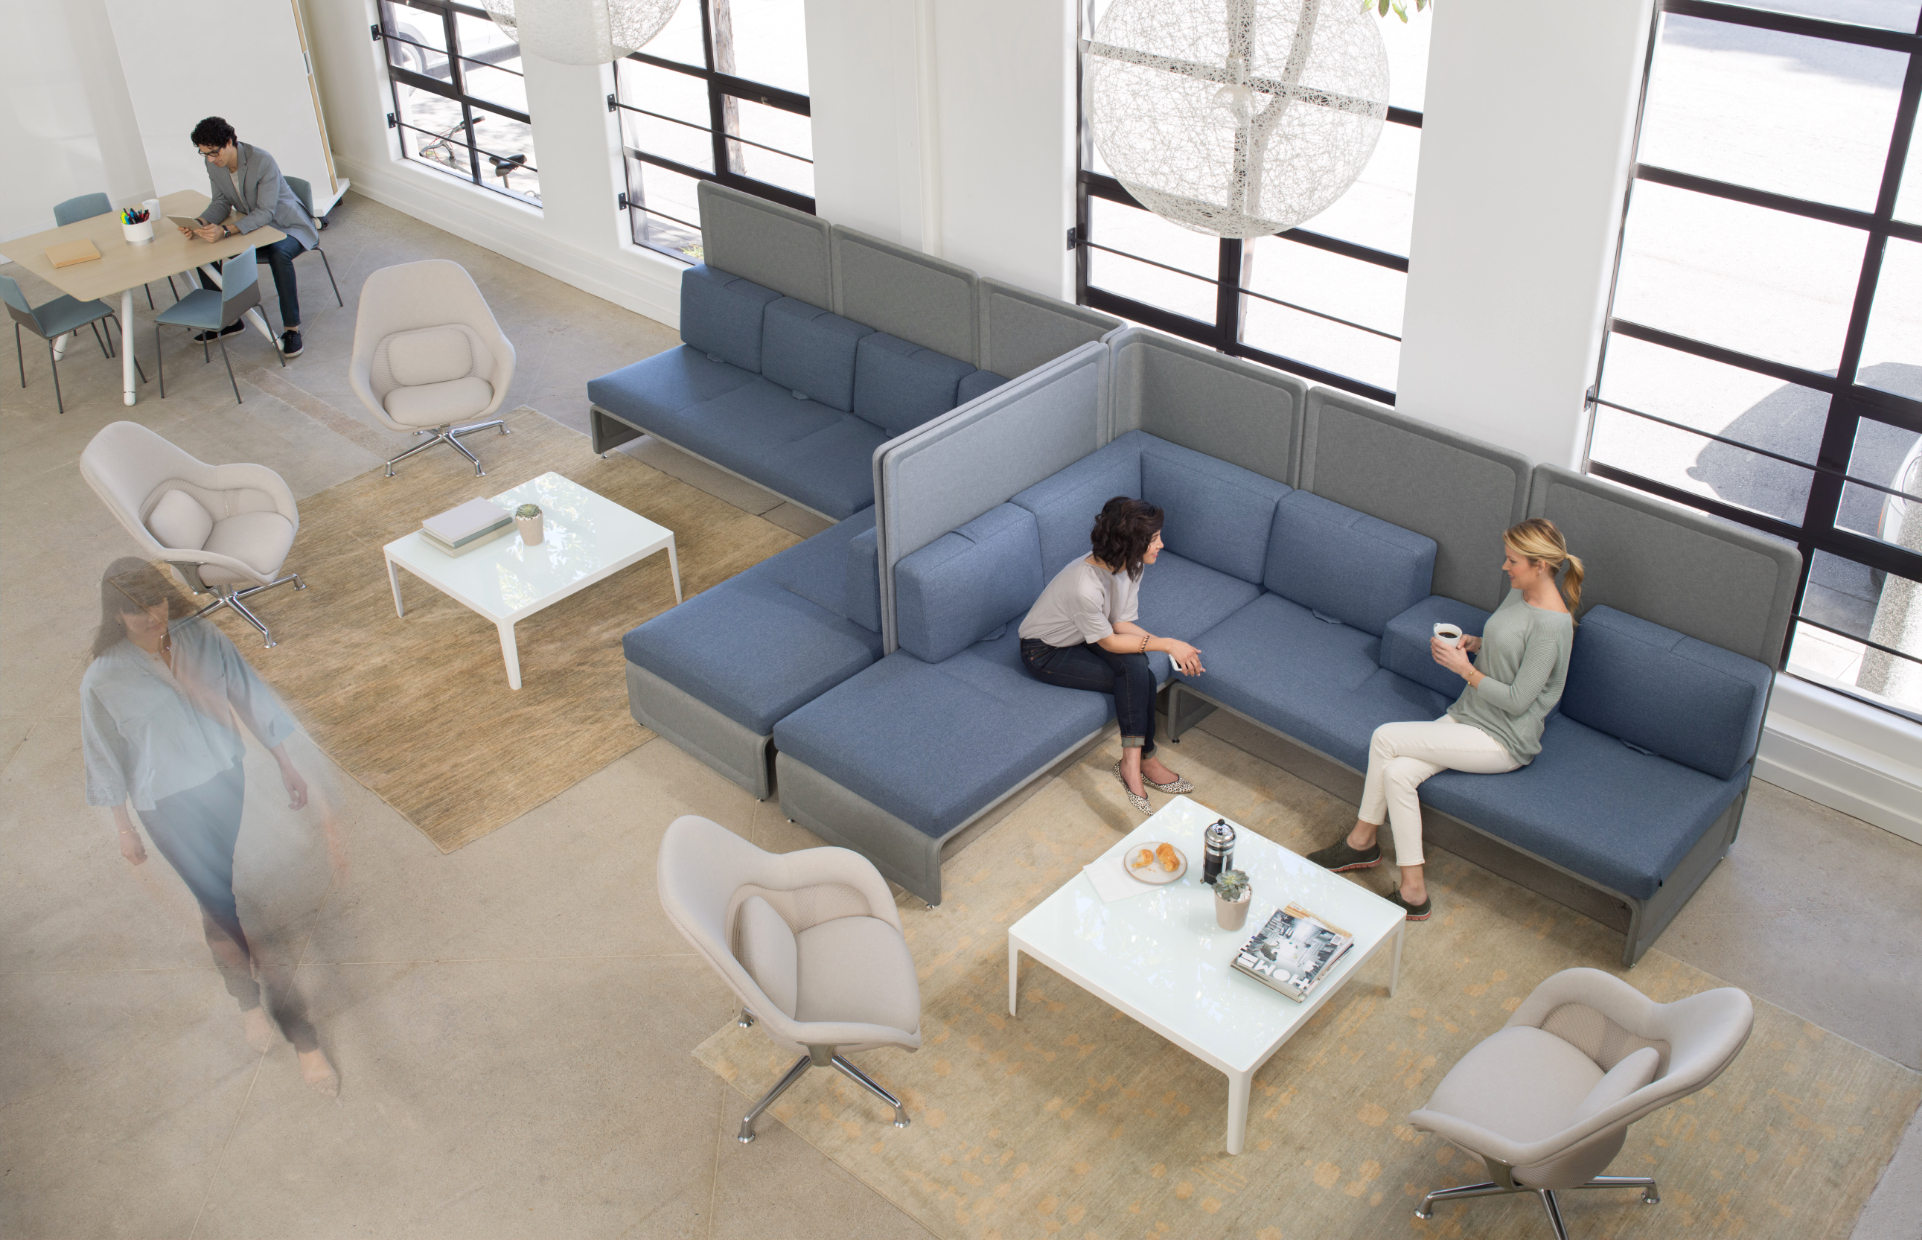 Space designed for social connection in office with blue sectional corner couches and high backed privacy screens surrounding white square coffee tables